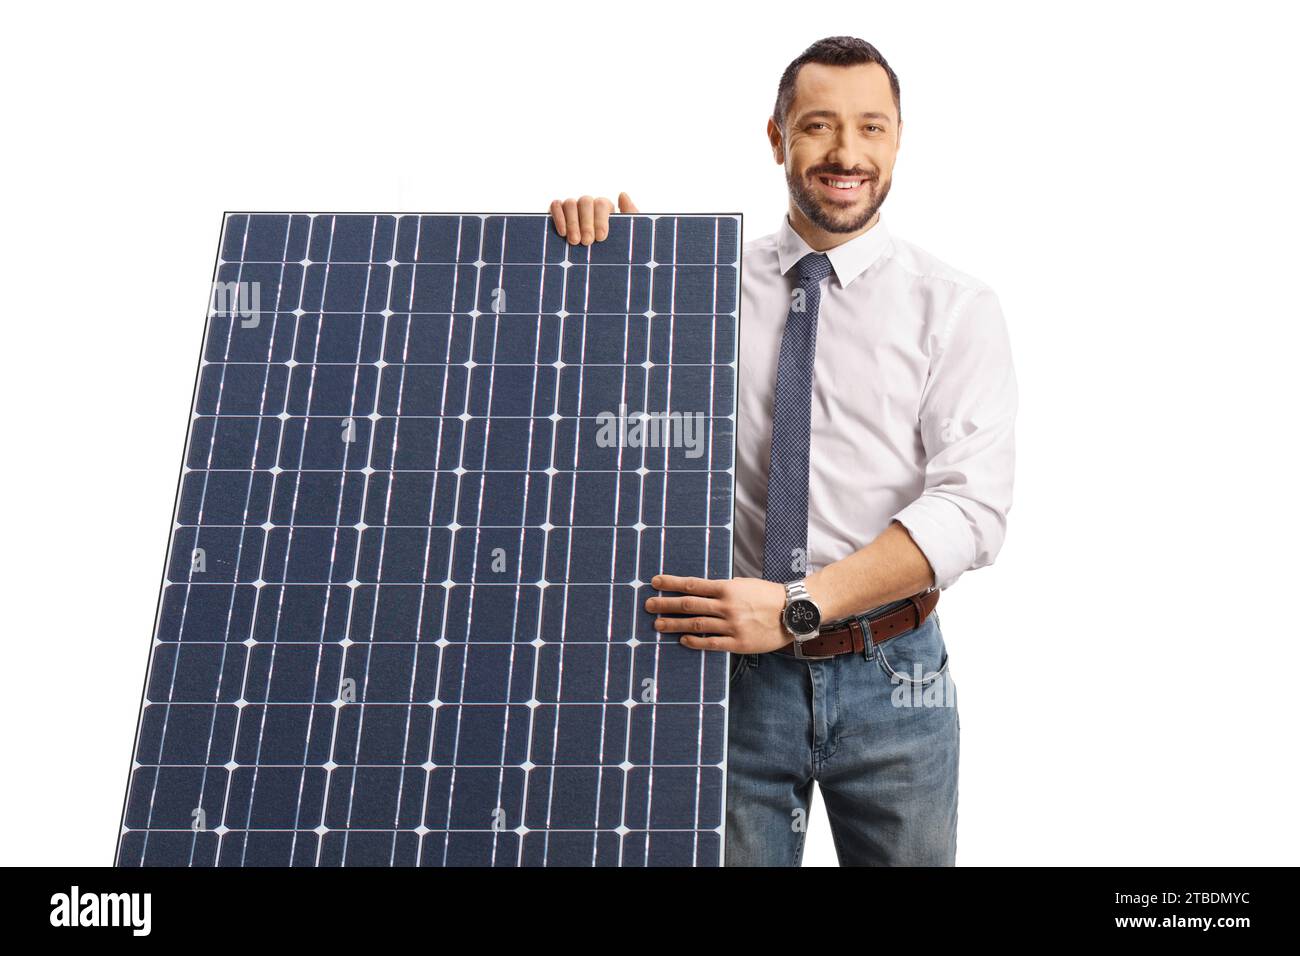 Professional man behind a solar panel isolated on white background Stock Photo